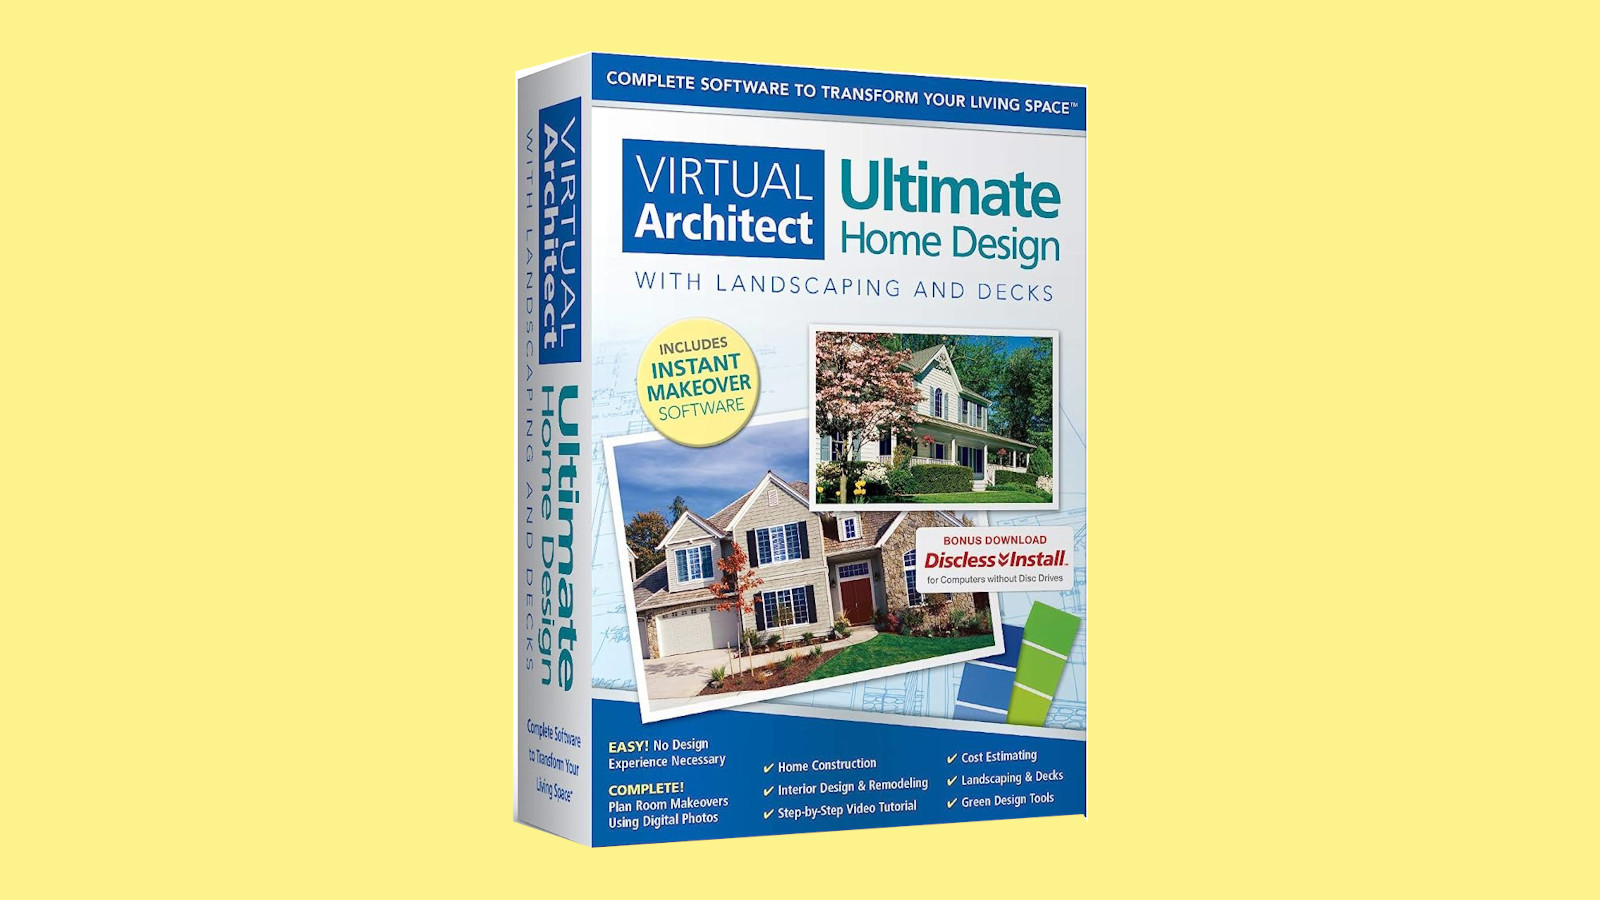 Virtual Architect Ultimate Home Design with Landscaping and Decks CD Key, $77.68